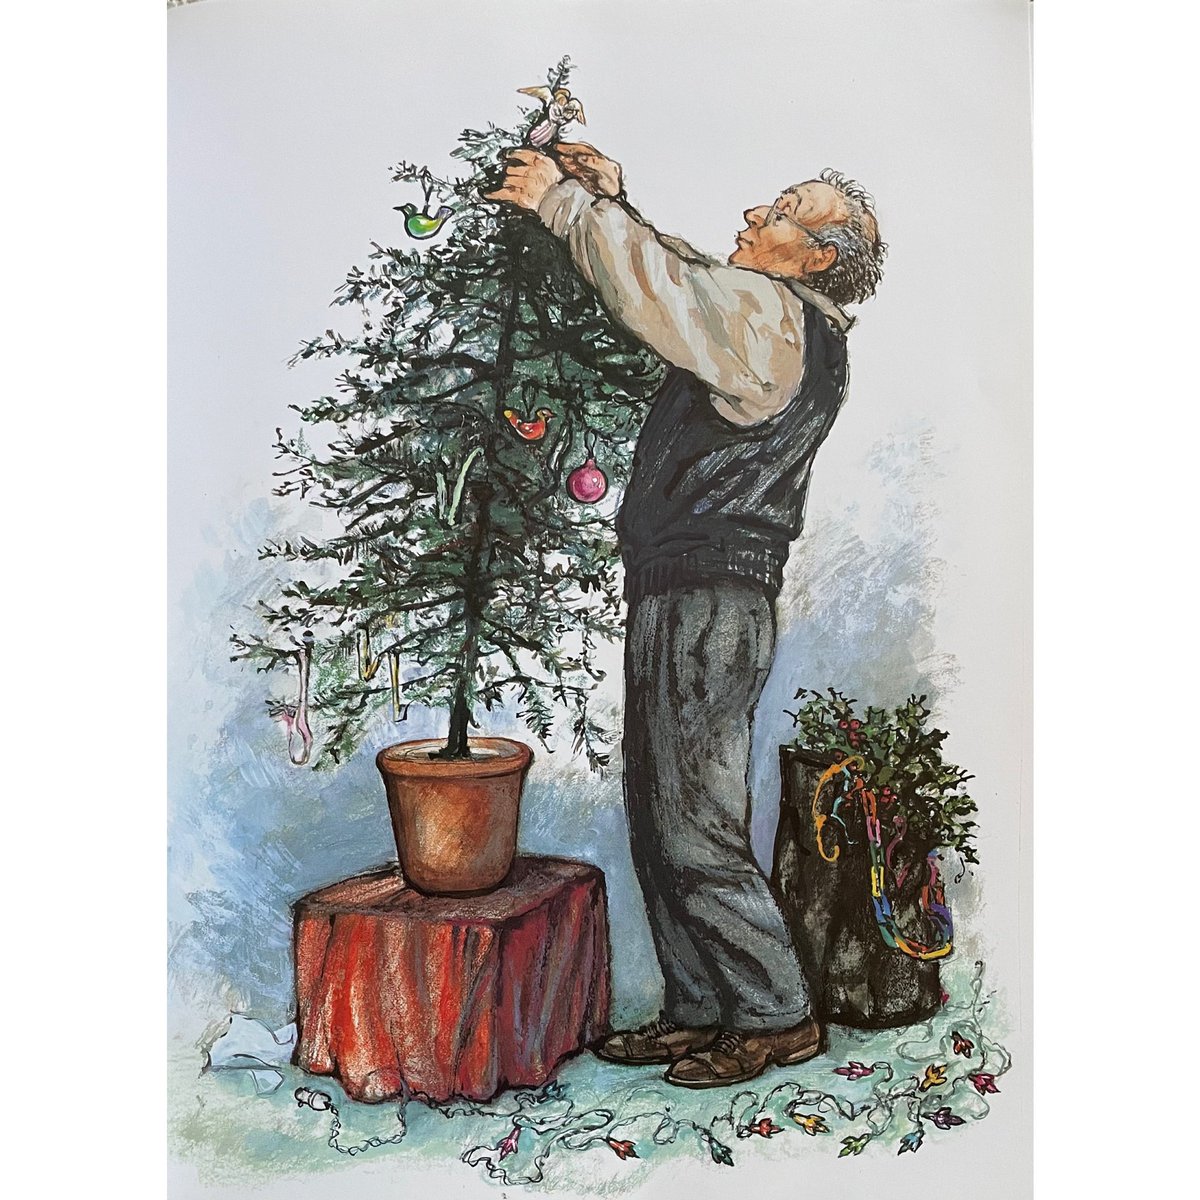 This week we will be looking at Burning the Tree from Stories by Firelight. Christmas was over and it was time to put all the decorations away in the loft until next year. Grandpa pulled off the shiny glass balls and handed them to William who laid them carefully in their box.